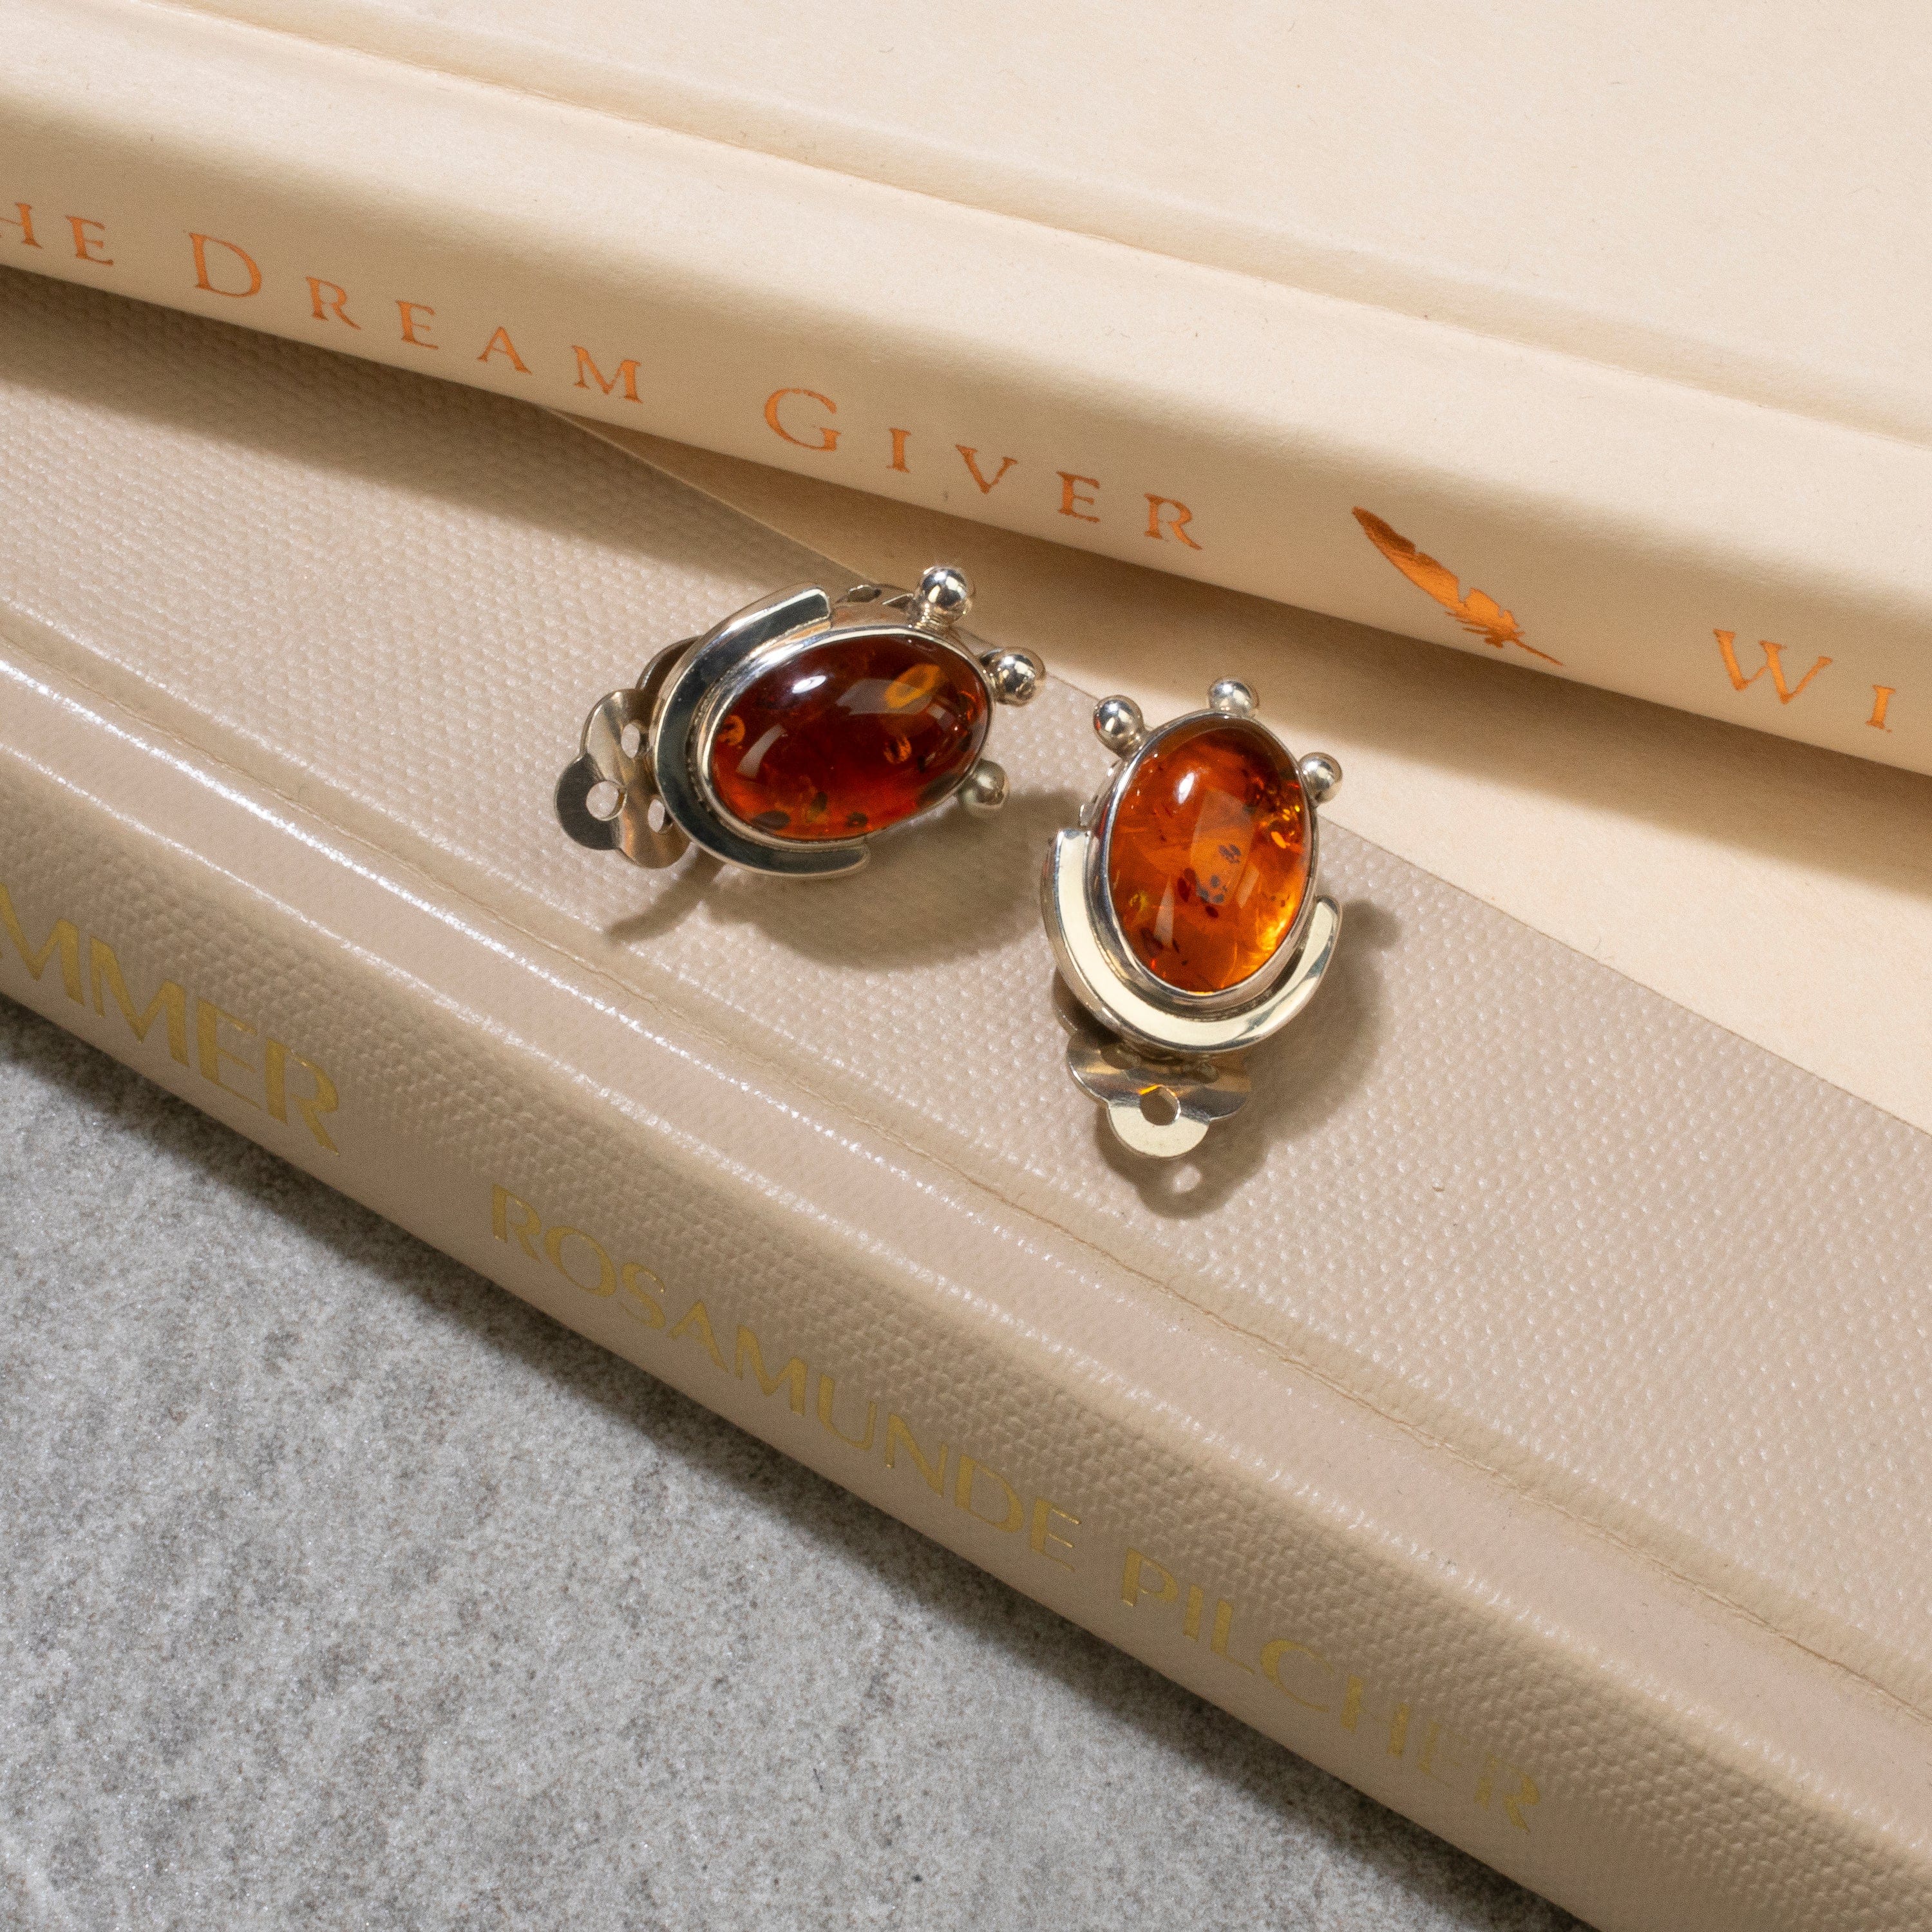 Kalifano Native American Jewelry Baltic Amber Oval USA Native American Made 925 Sterling Silver Earrings with Stud Backing NAE250.010